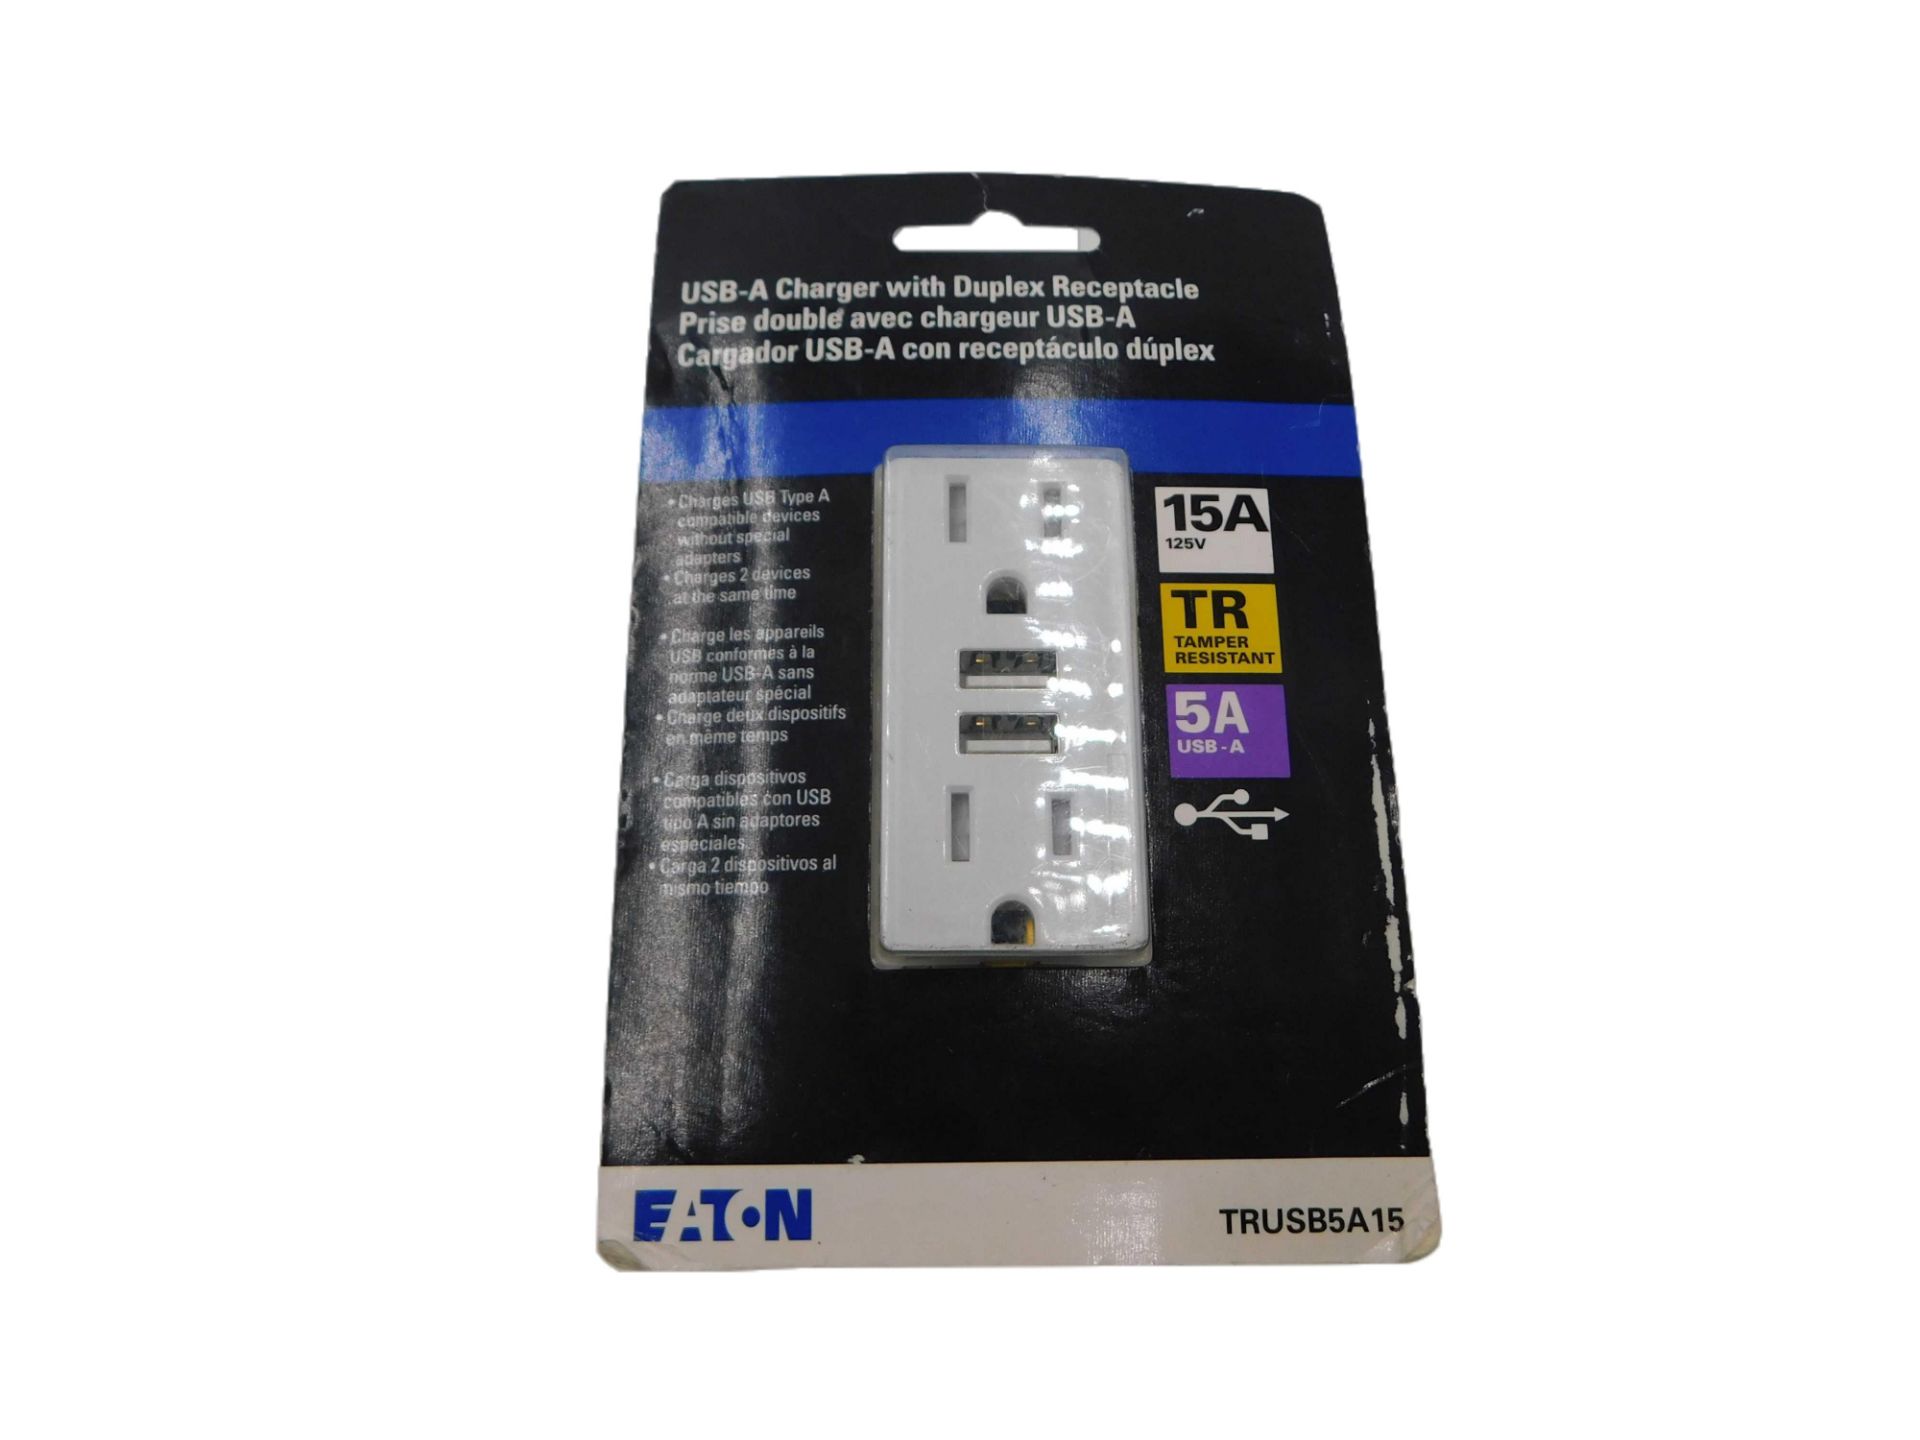 40x Eaton TRUSB5A15W-KB-LW Outlets Combination USB Charger/Duplex Receptacle 15A 125V White EA Tampe